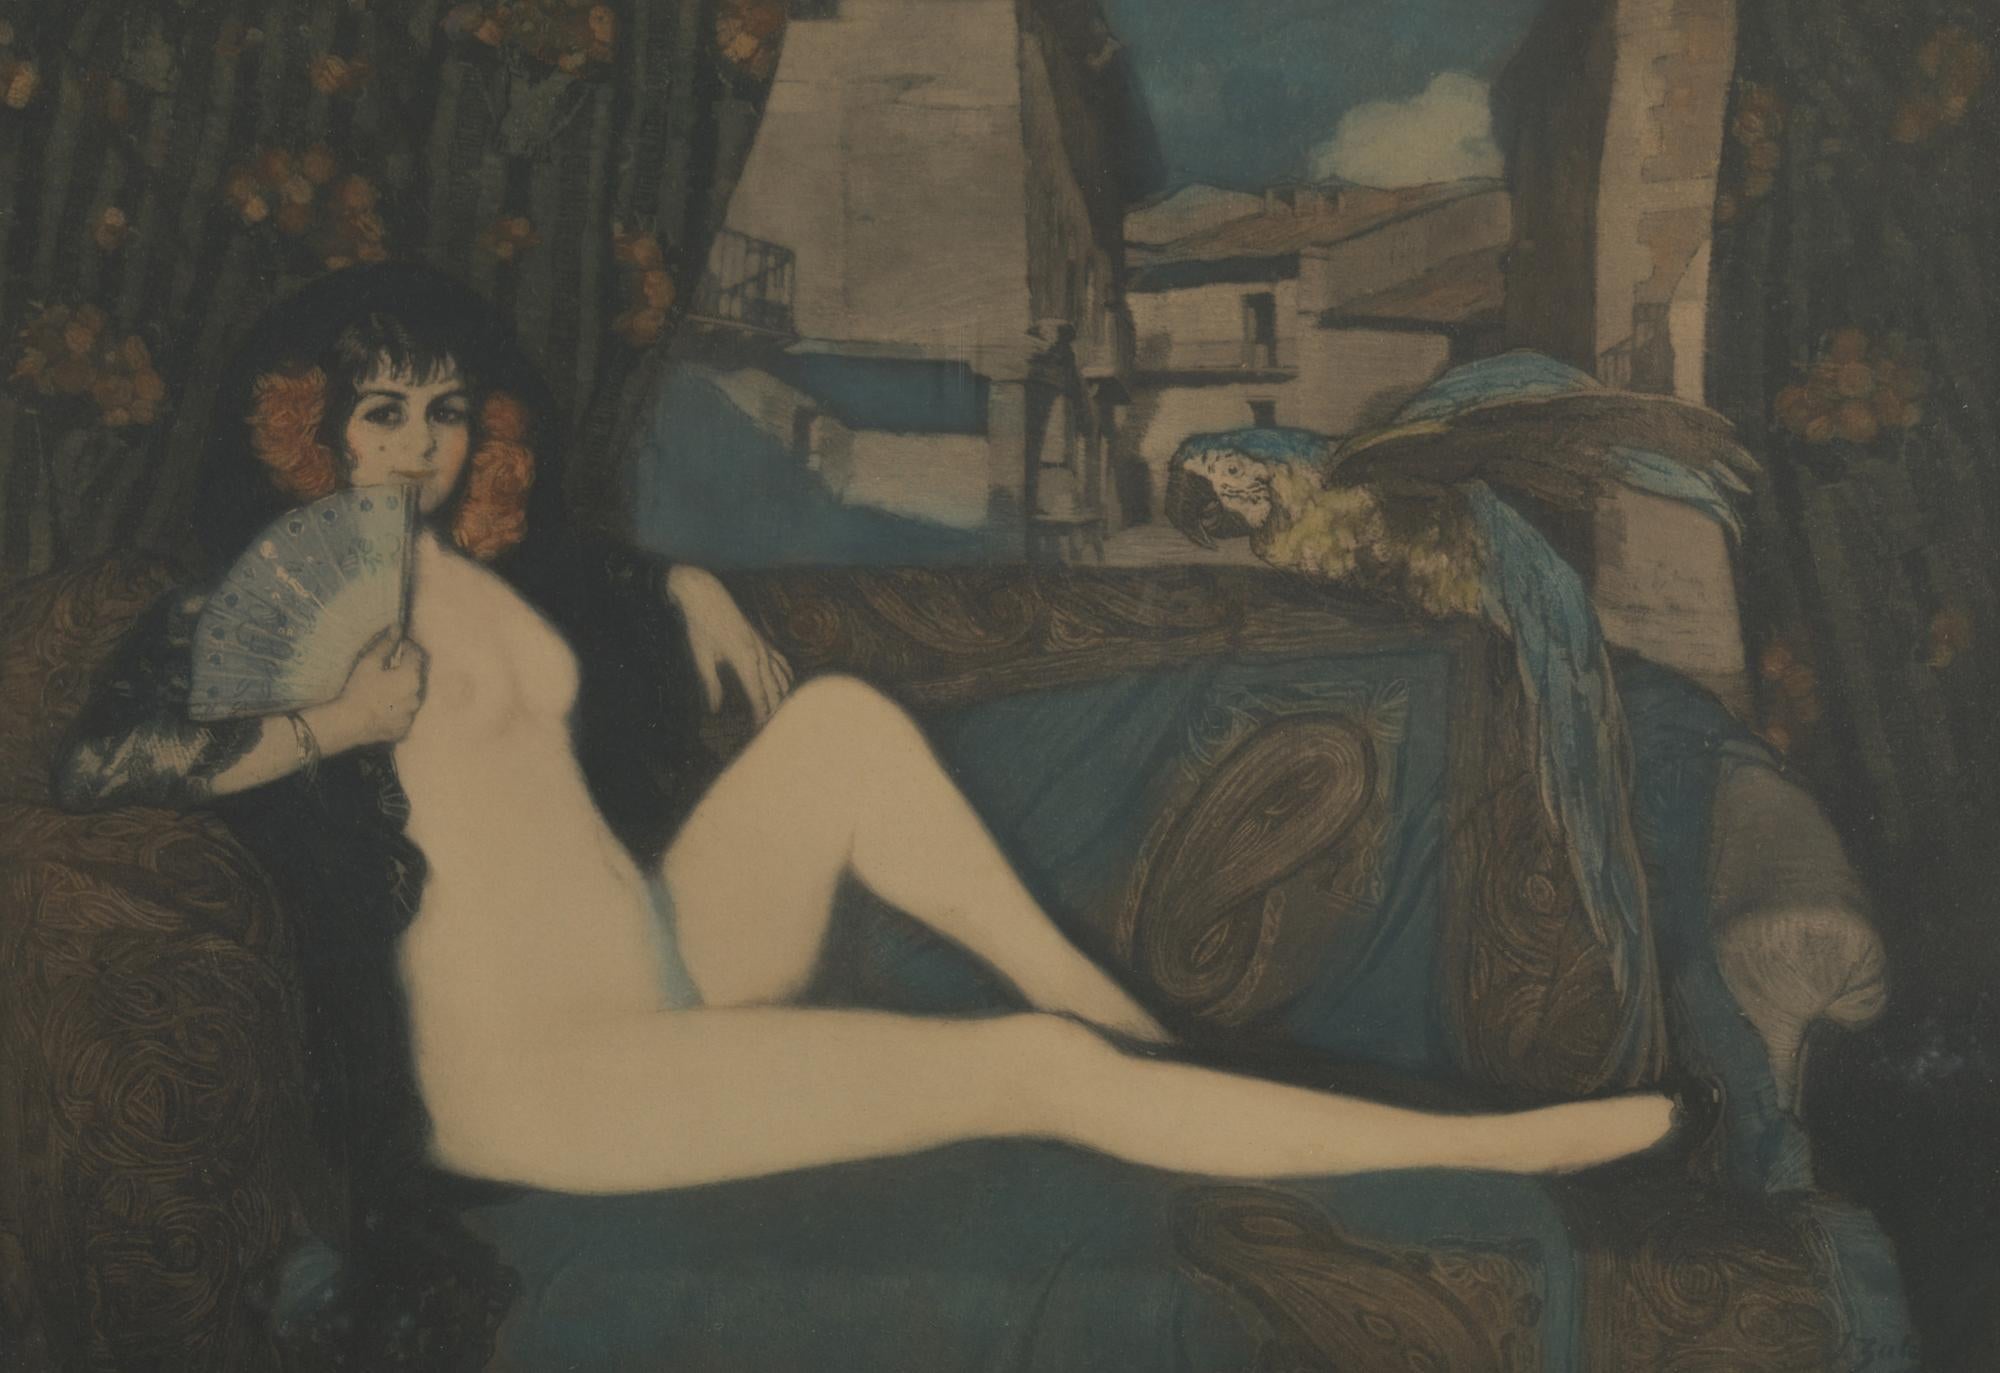 About the artist
Ignacio Zuluaga y Zabaleta (1870-1945) was a Spanish genre painter of beautiful women in sensual and erotic poses. “La Maya Nue” is a painting with a subject that is used several times by artists, such as Fracisco Goya, “Maja Nue”